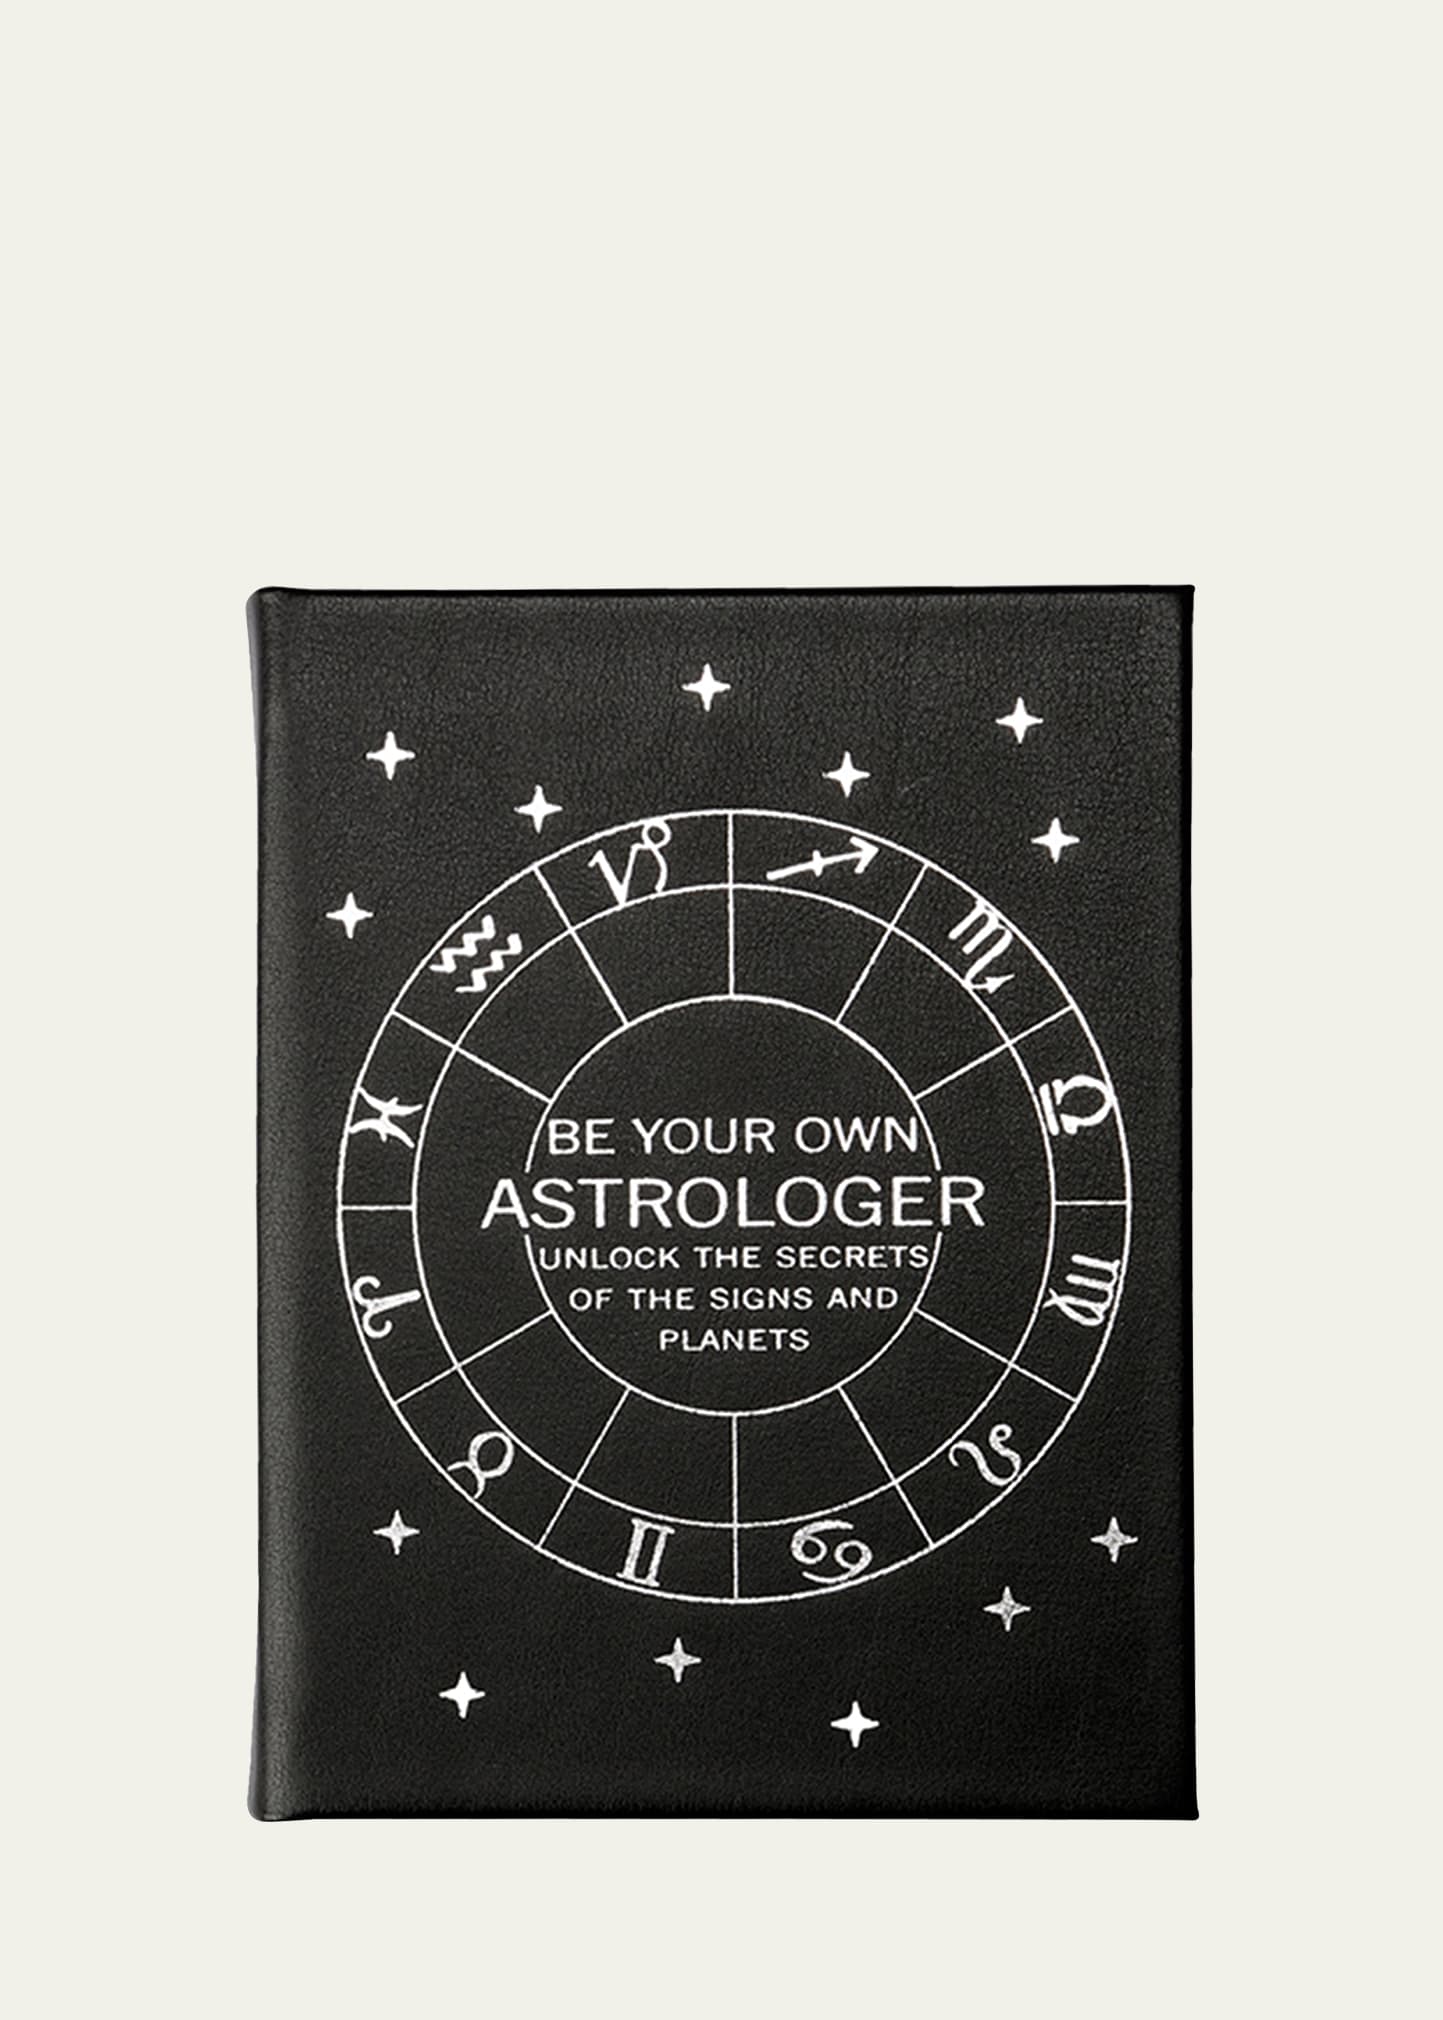 Be Your Own Astrologer: Unlock the Secrets of the Signs and Planets Book by Joanna Watters